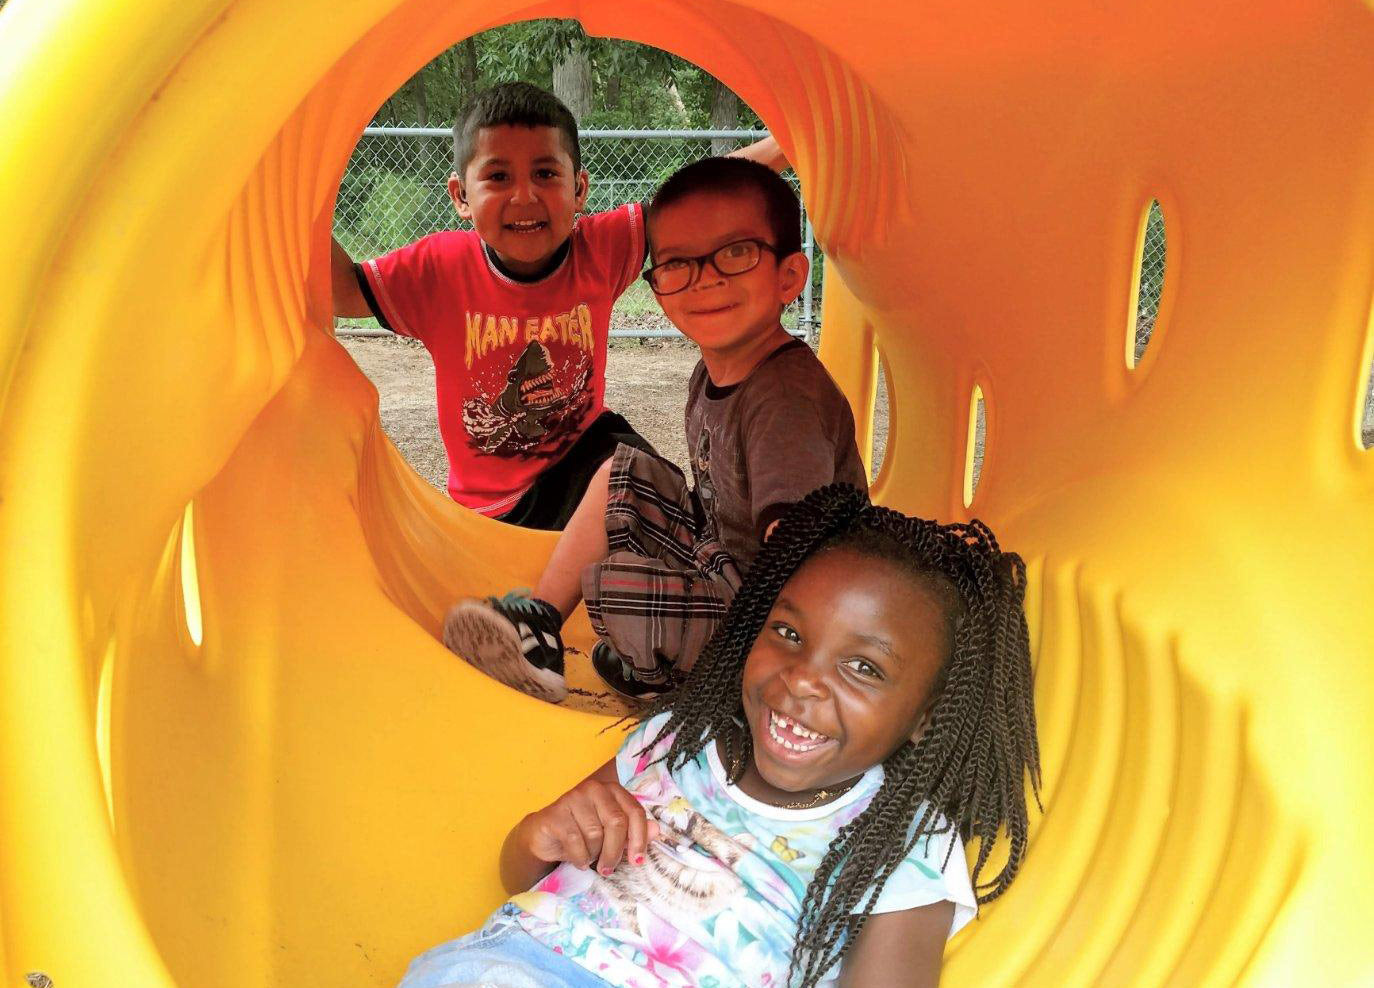 Three young children play in a yellow playground tunnel.  Two children have hearing aids and one has glasses.  The children are looking happy and laughing.